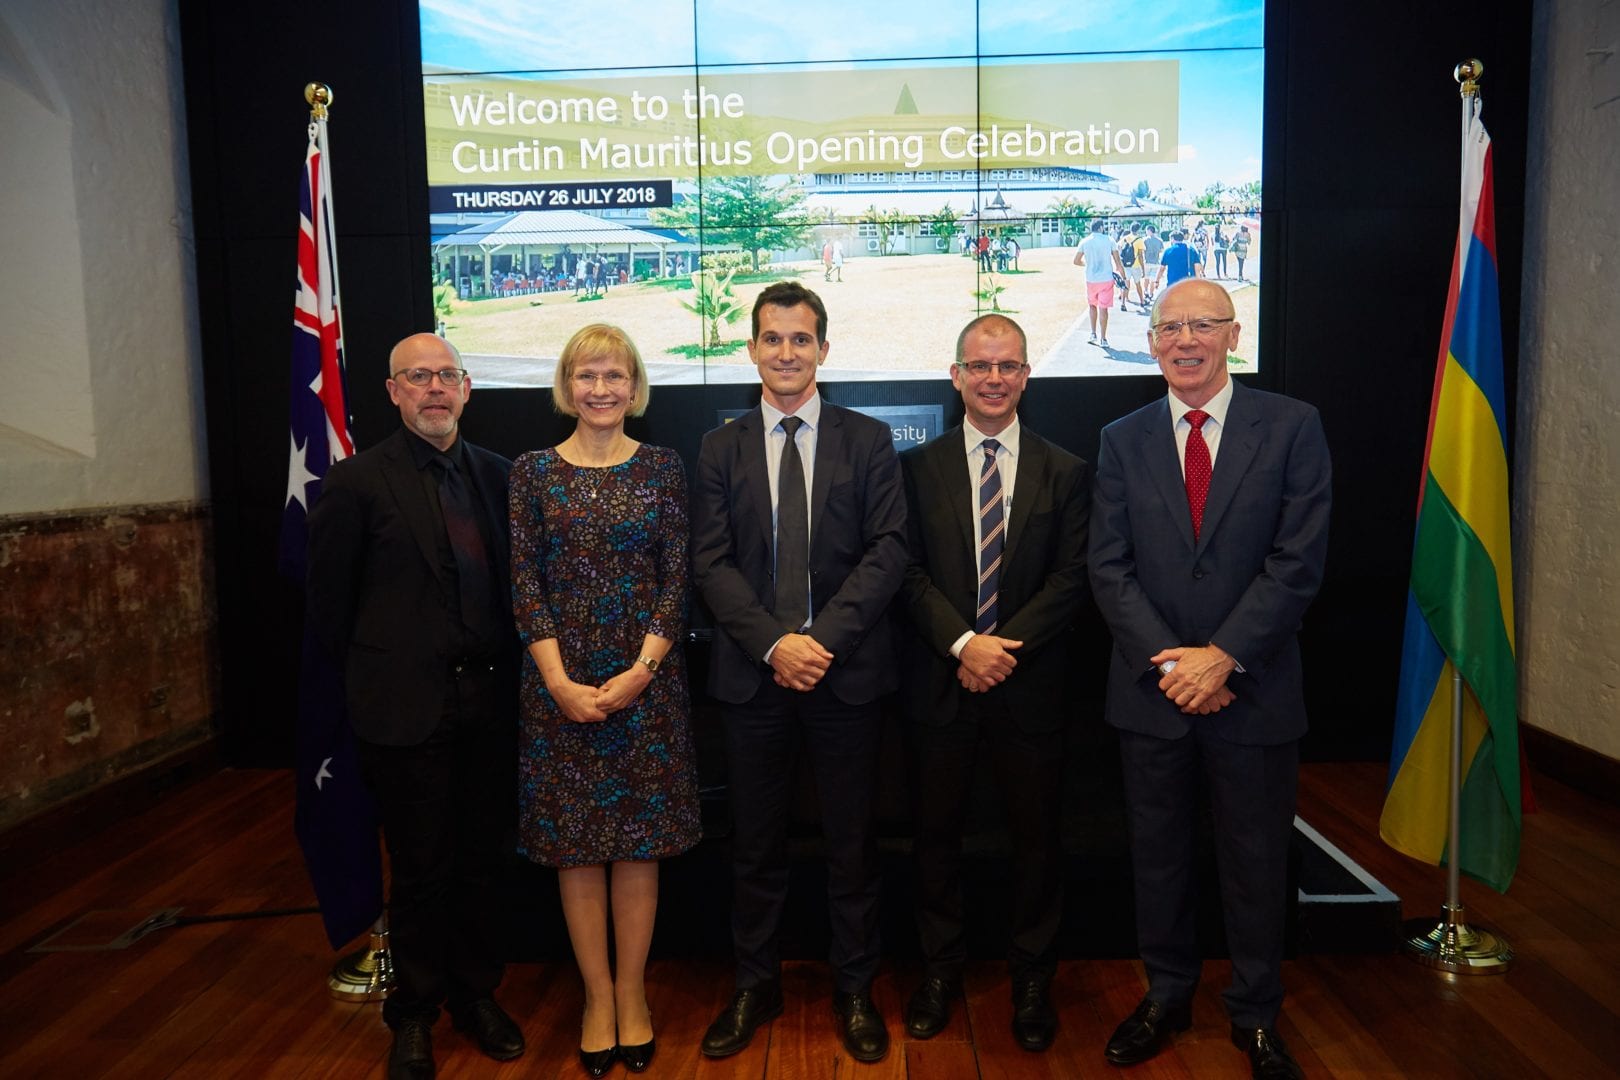 Image for Curtin Mauritius campus opening celebrated in Perth